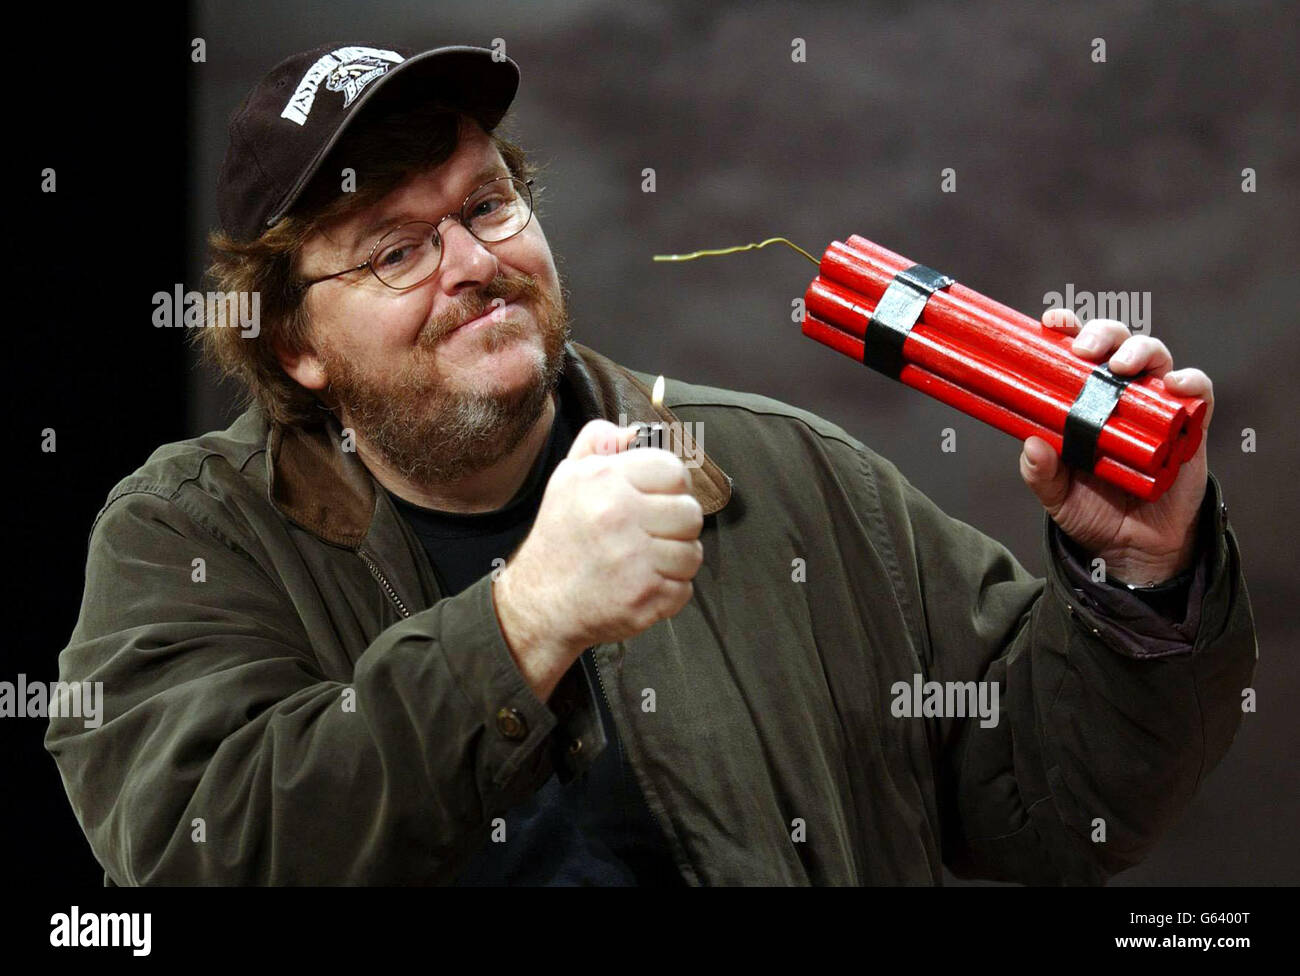 American film and documentary maker and author Michael Moore at the Roundhouse Theatre in London, for a photocall to promote his new show 'Michael Moore Live!' * Which is described as a platform for the expression of revolting opinions about America's polictical and legislative systems. Stock Photo